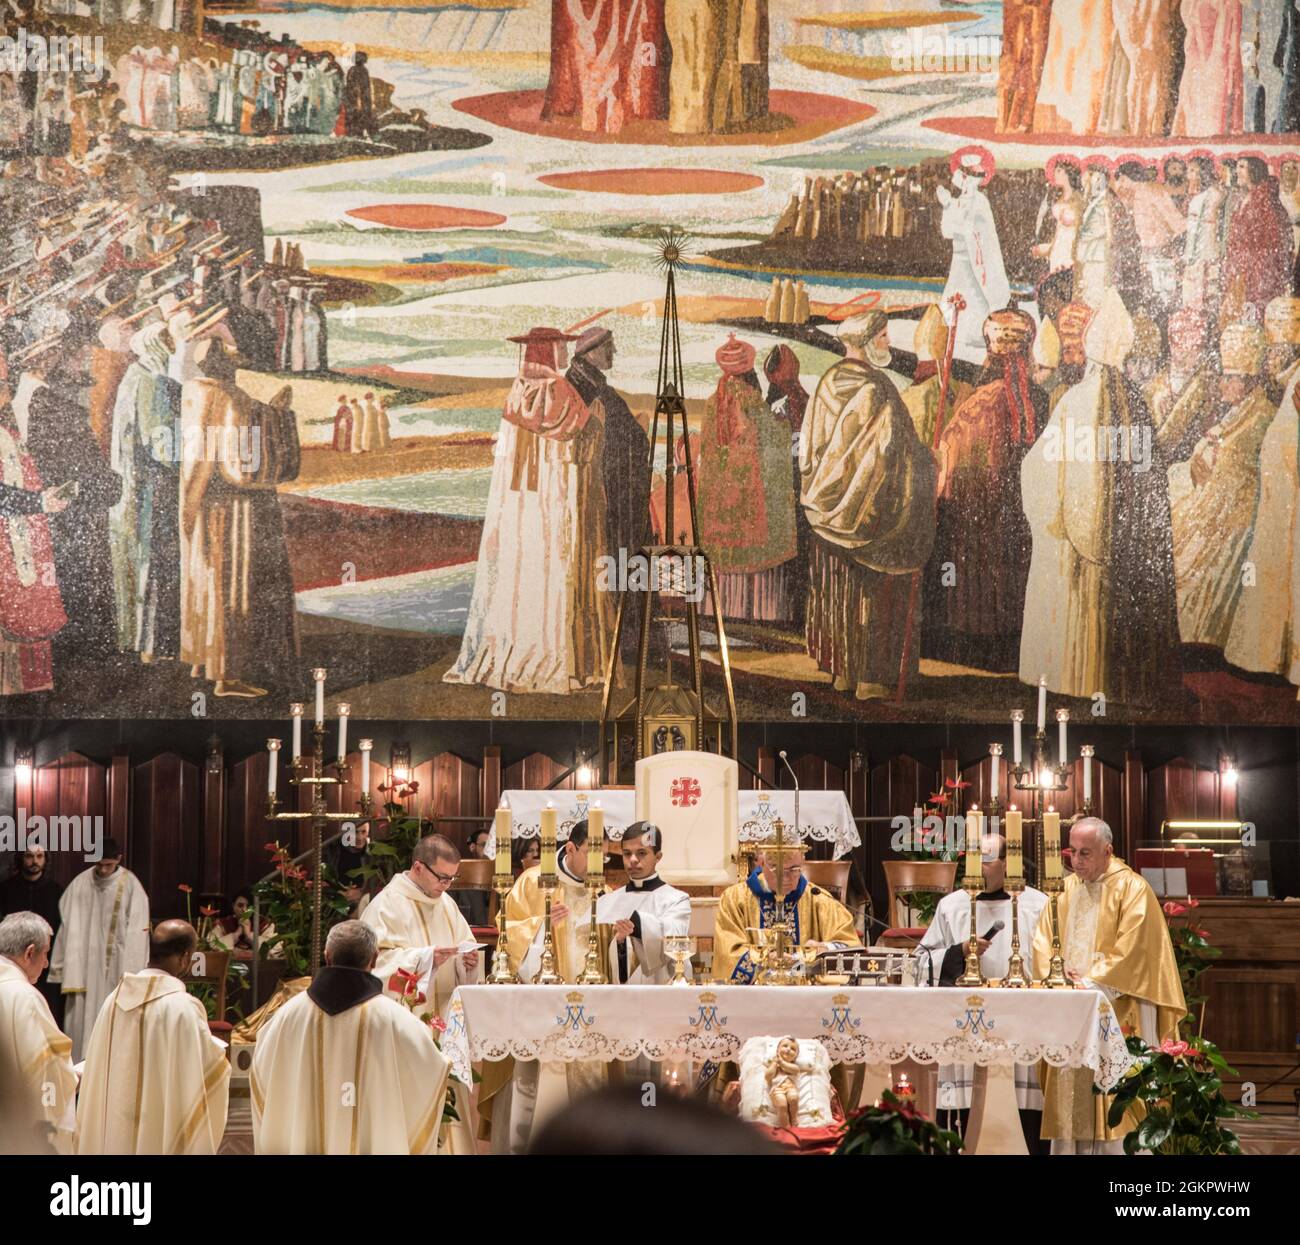 Christmas Mass at the Basilica of the Annunciation, Nazareth, Israel Stock Photo